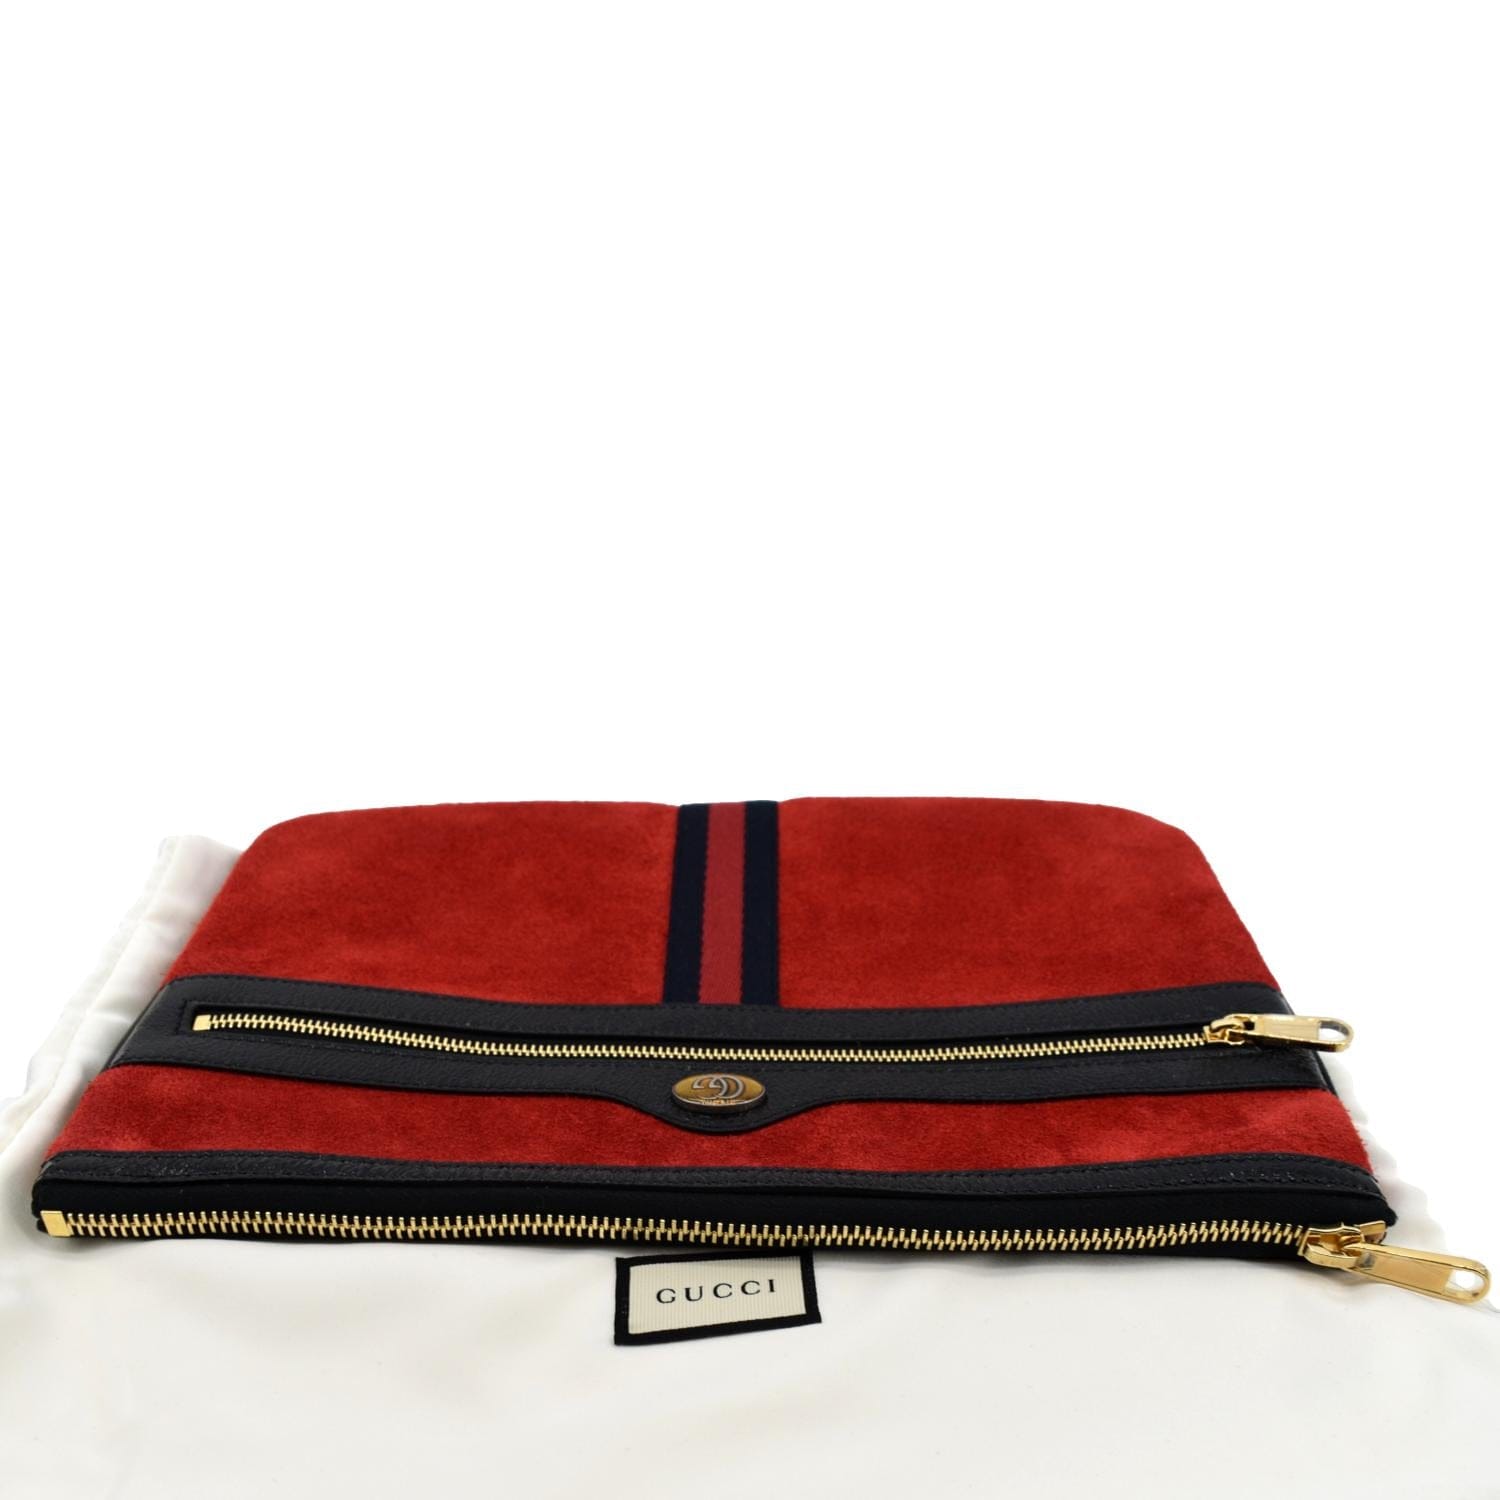 Gucci - Authenticated Clutch Bag - Leather Red Plain for Women, Never Worn